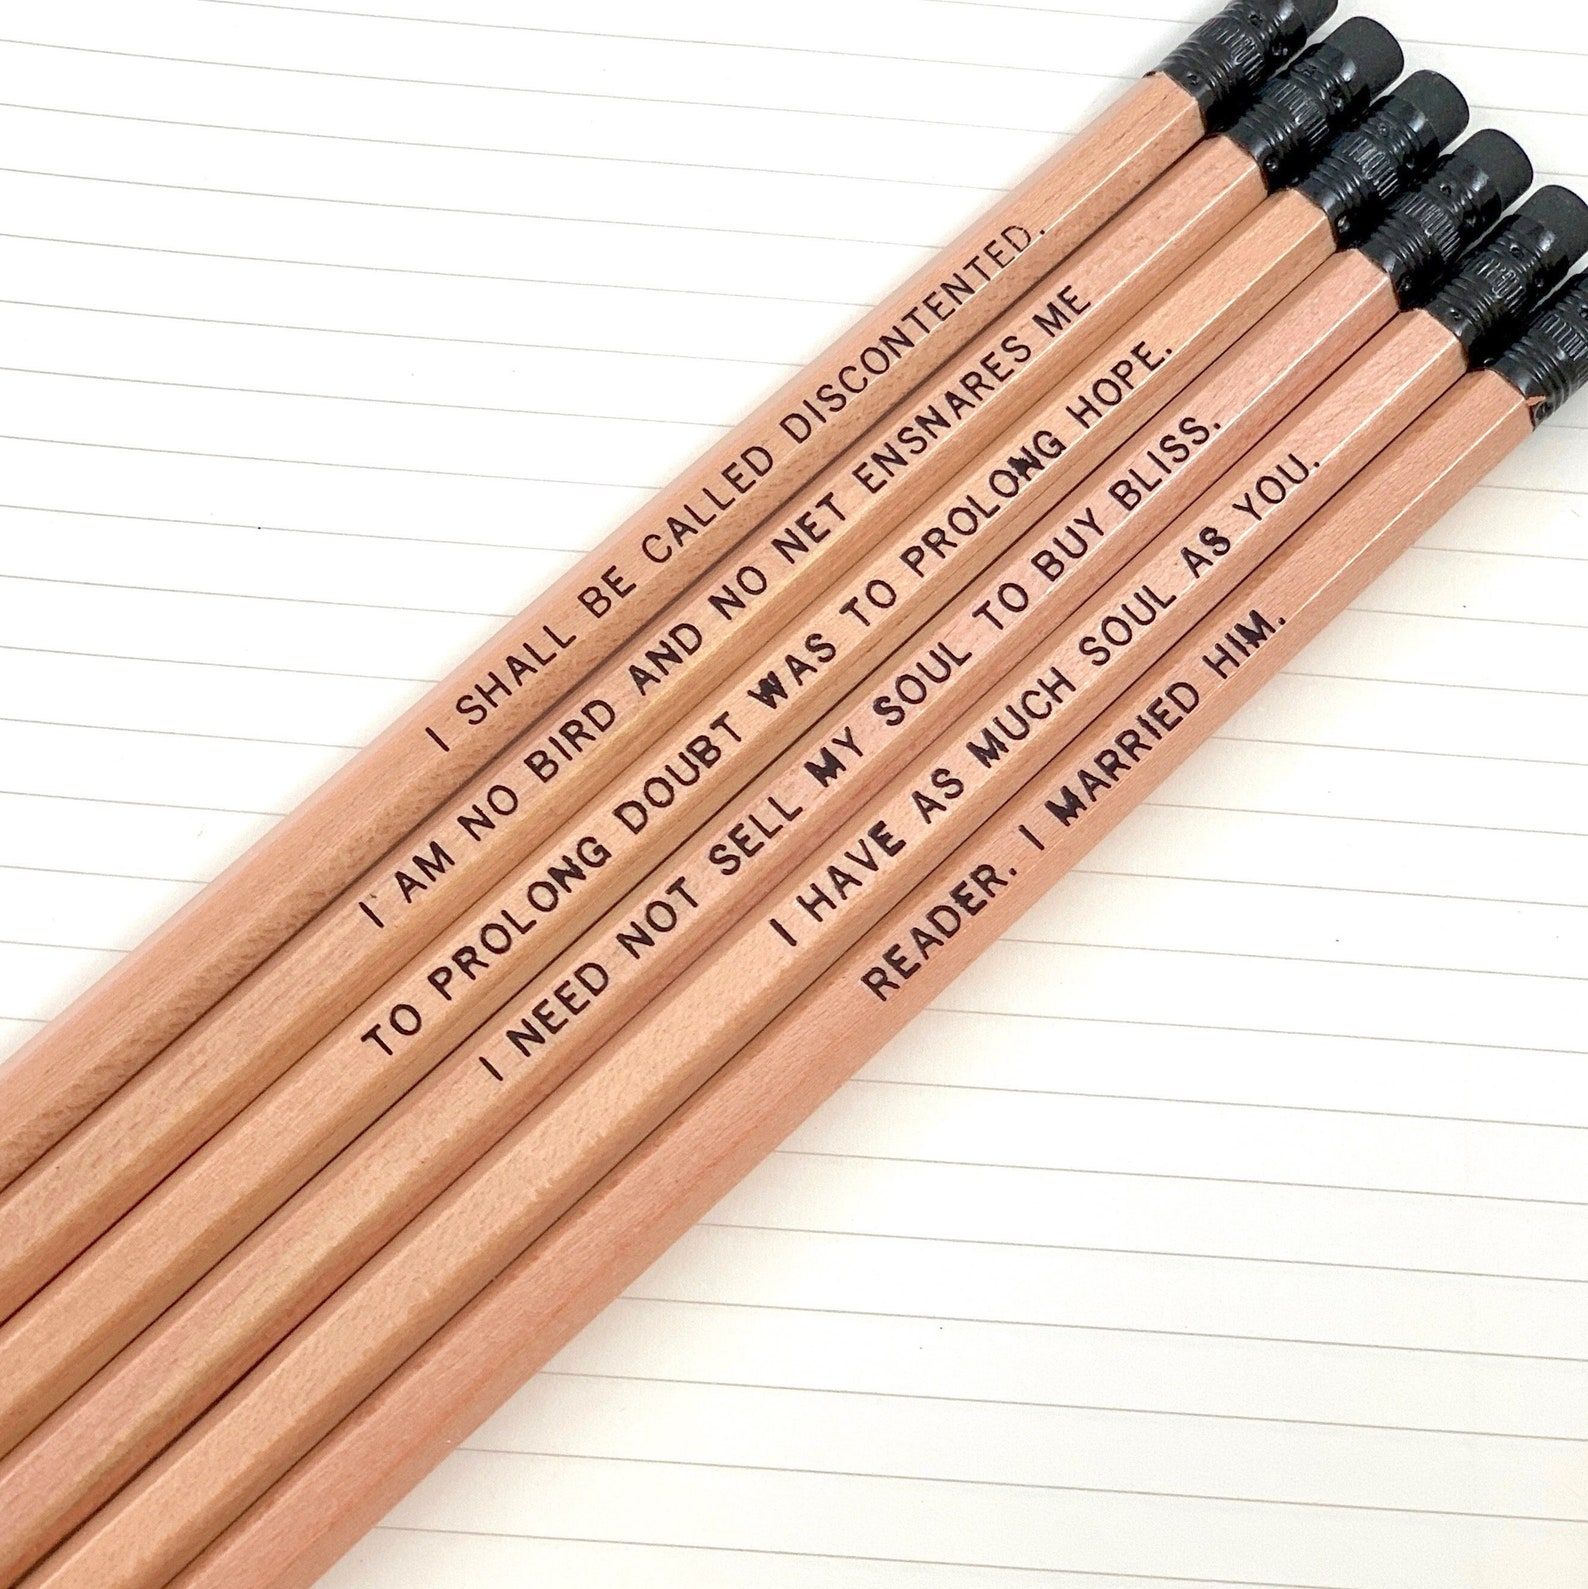 natural wood colored pencils, each printed with a quote from Jane Eyre like 